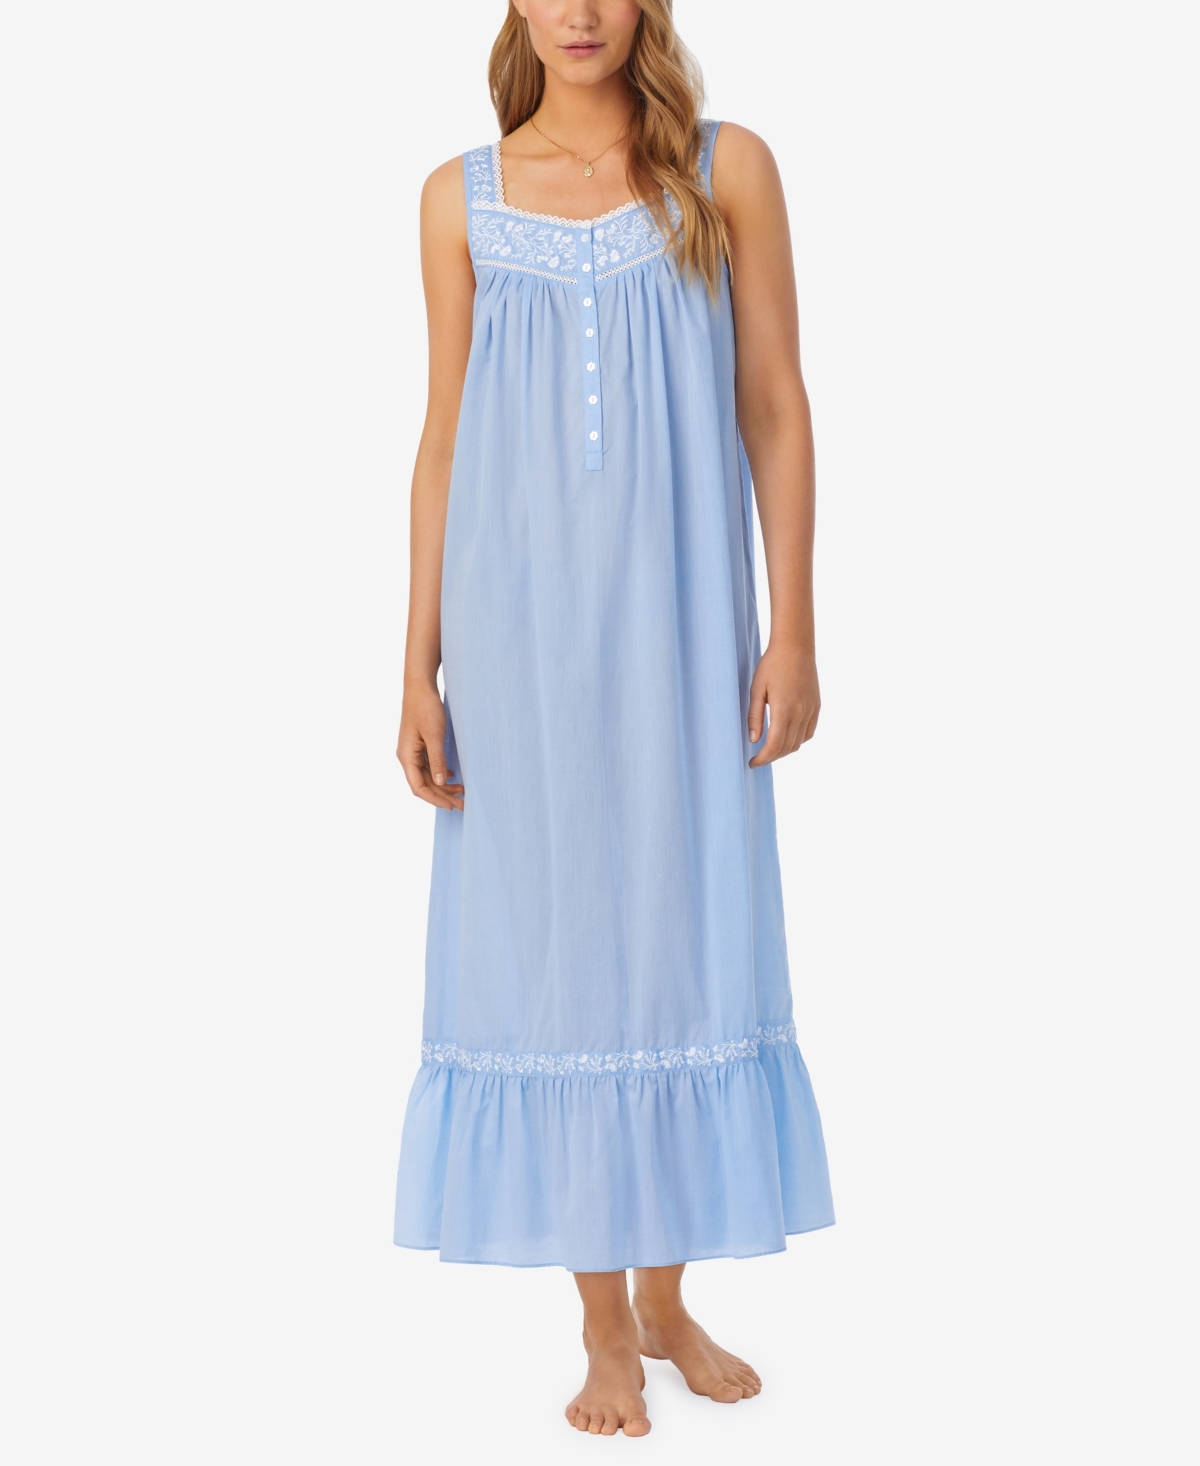 Women's Cotton Chambray Embroidered Ballet Nightgown - Blue